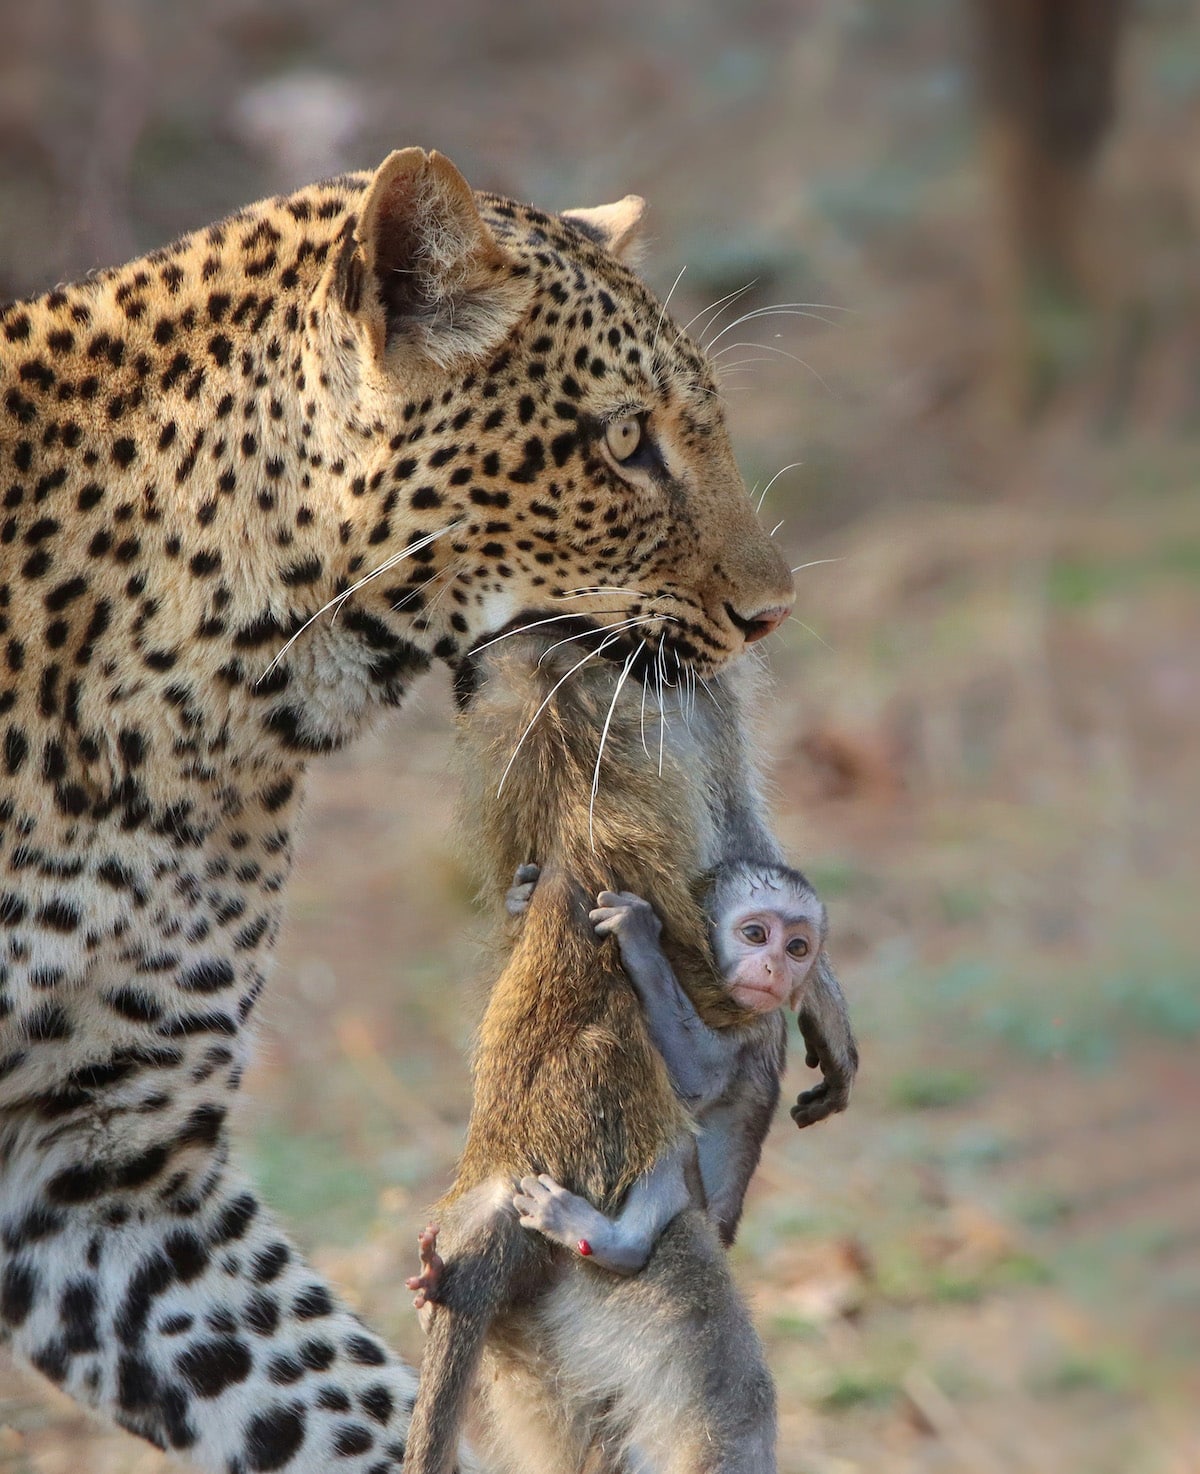 Leopard Carrying Carcass of a Monkey